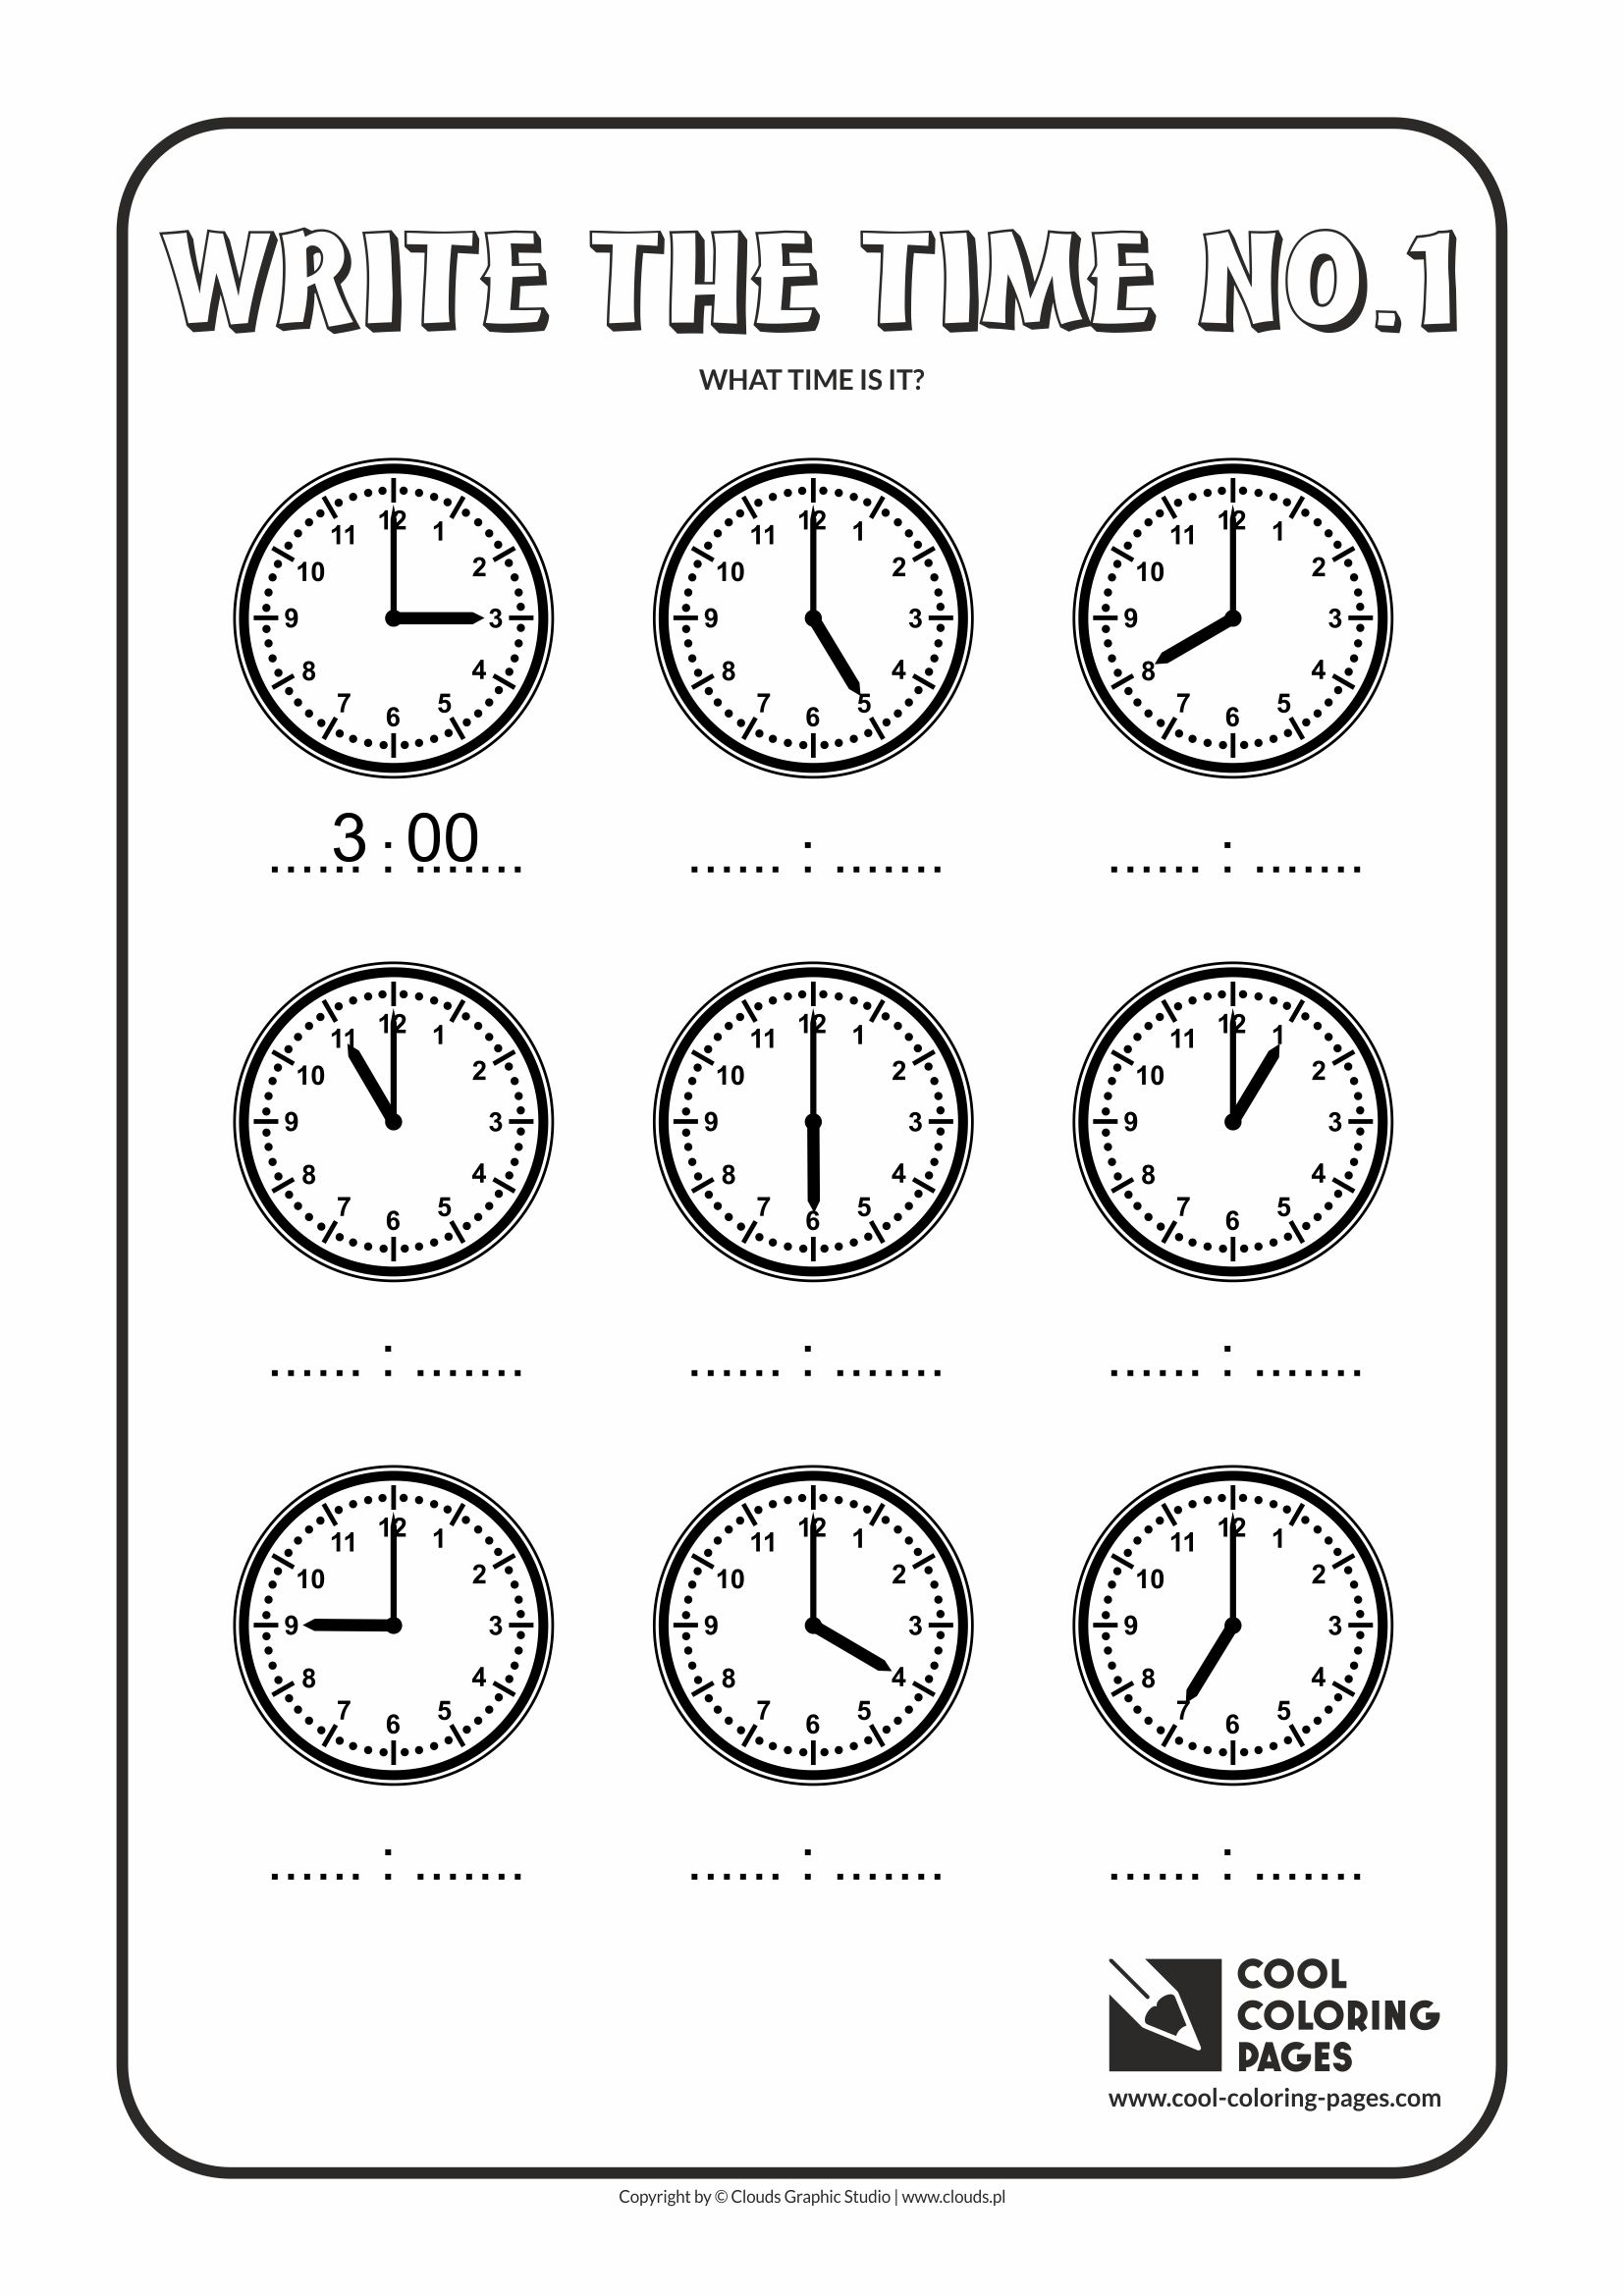 Cool Coloring Pages - Time / Write the time no.1